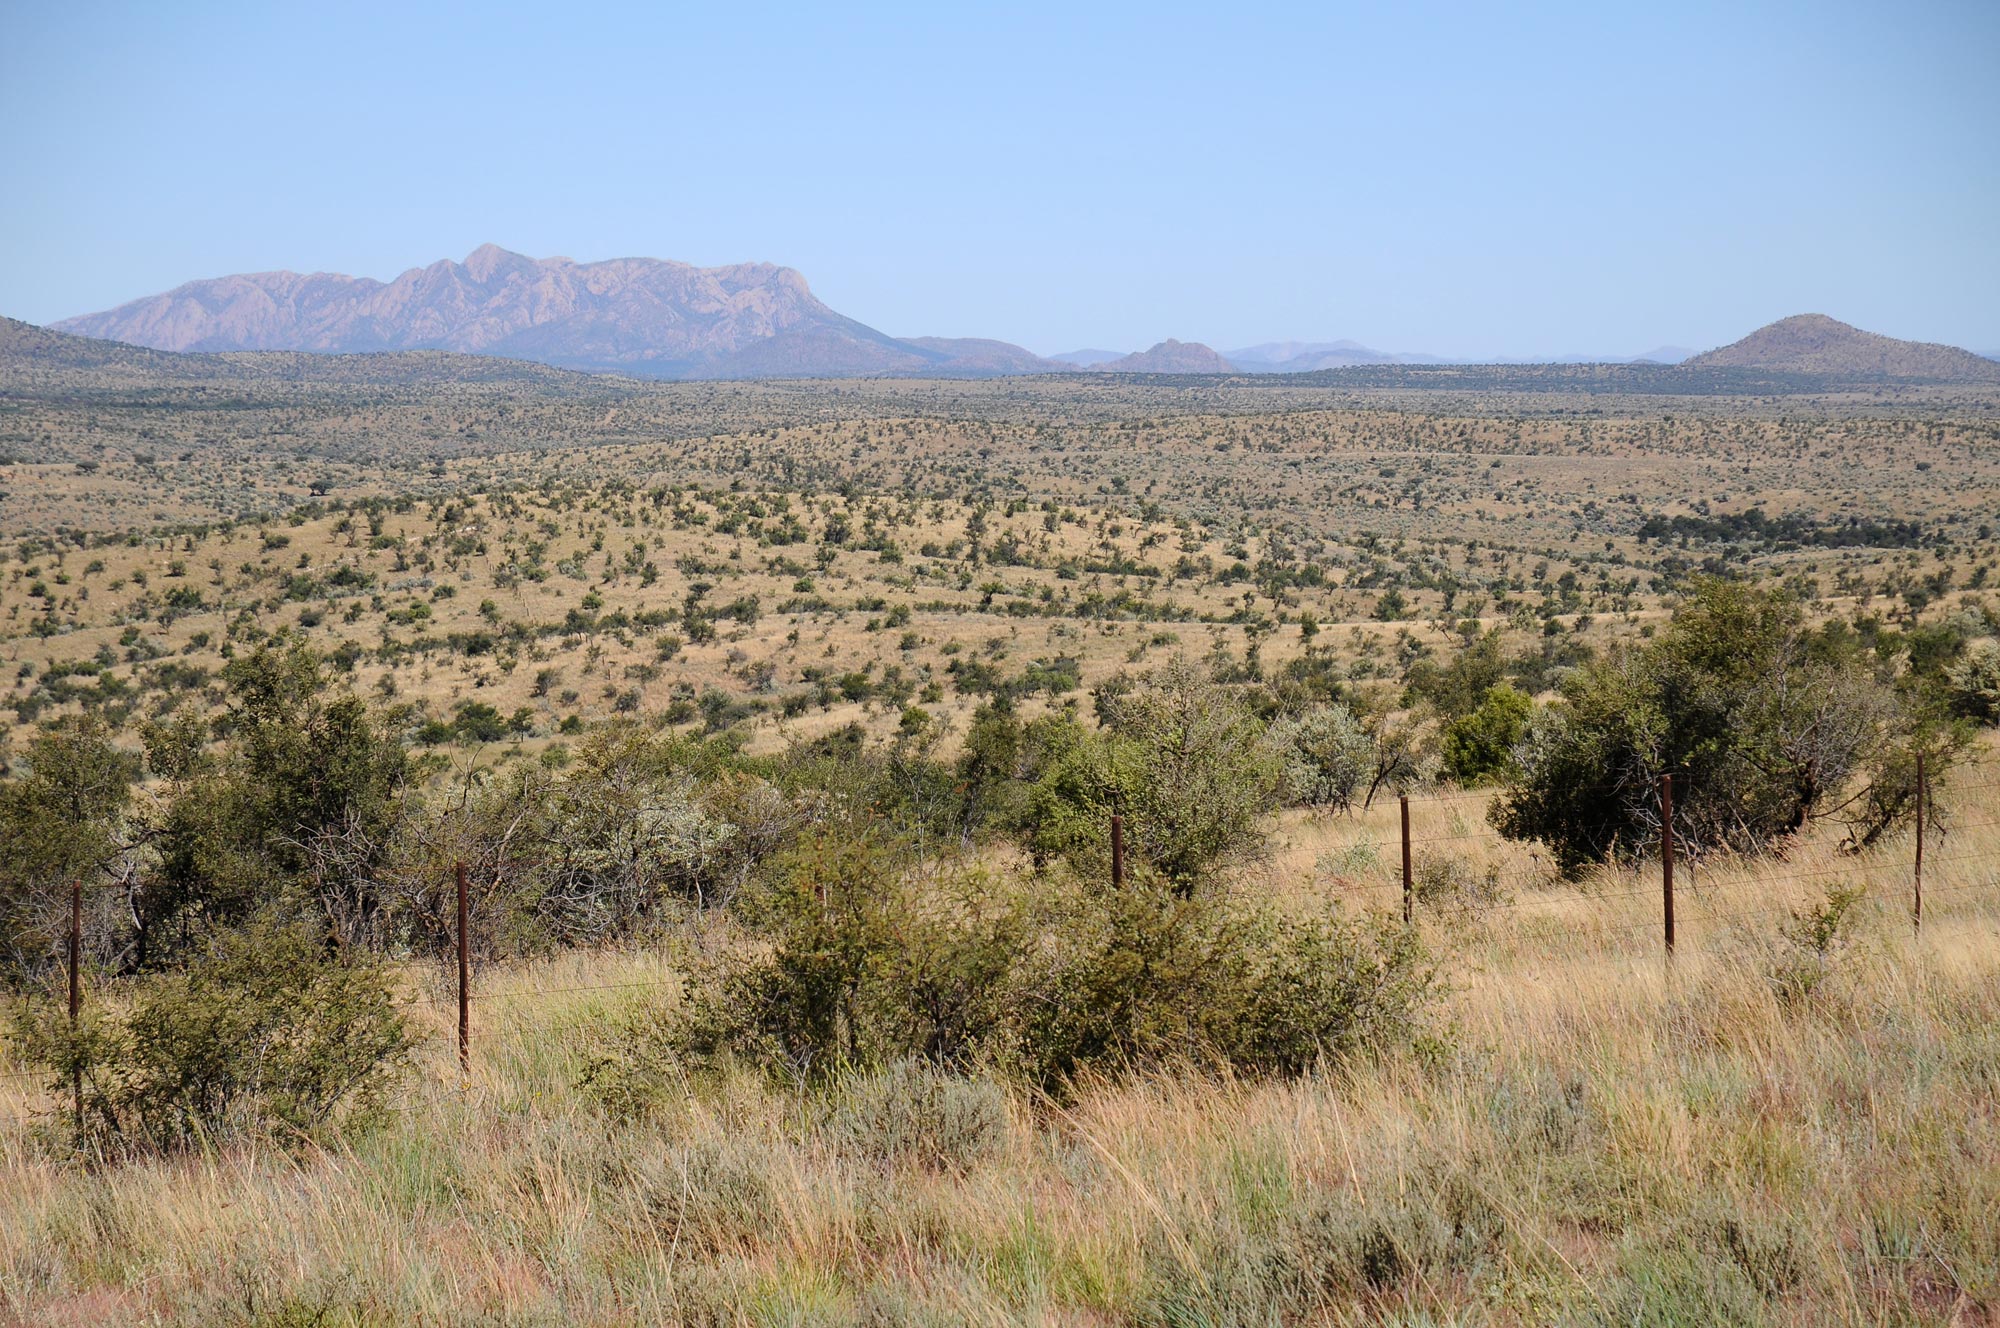 A typical Namibian savanna in the Khomas Highland with scattered trees and bushes. Mean annual precipitation is around 300 mm and the woody plants are quite low.